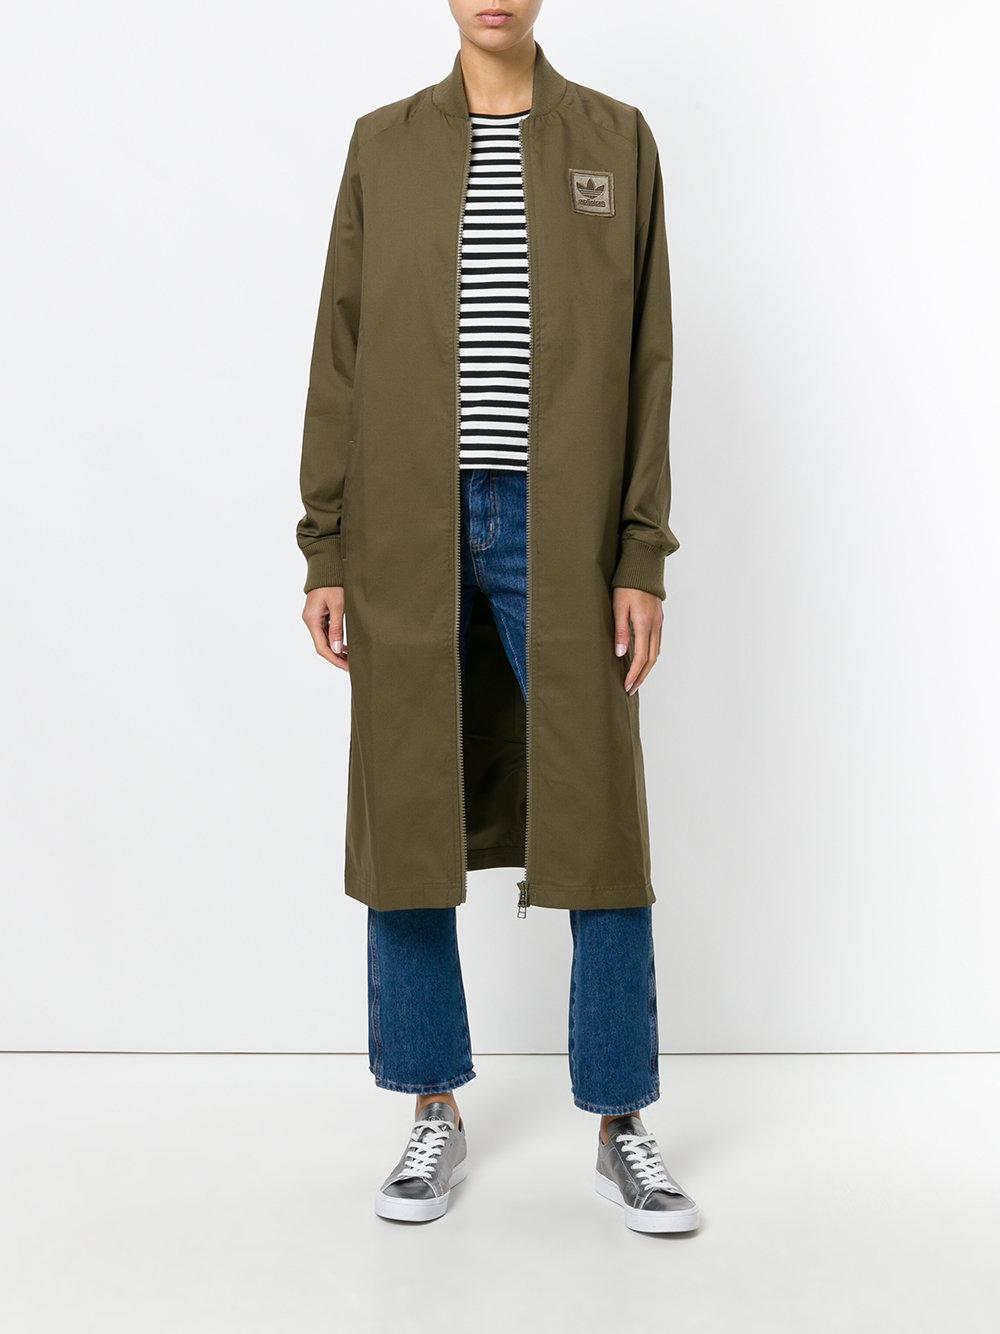 adidas Originals Cotton Extra Long Bomber Jacket in Green | Lyst